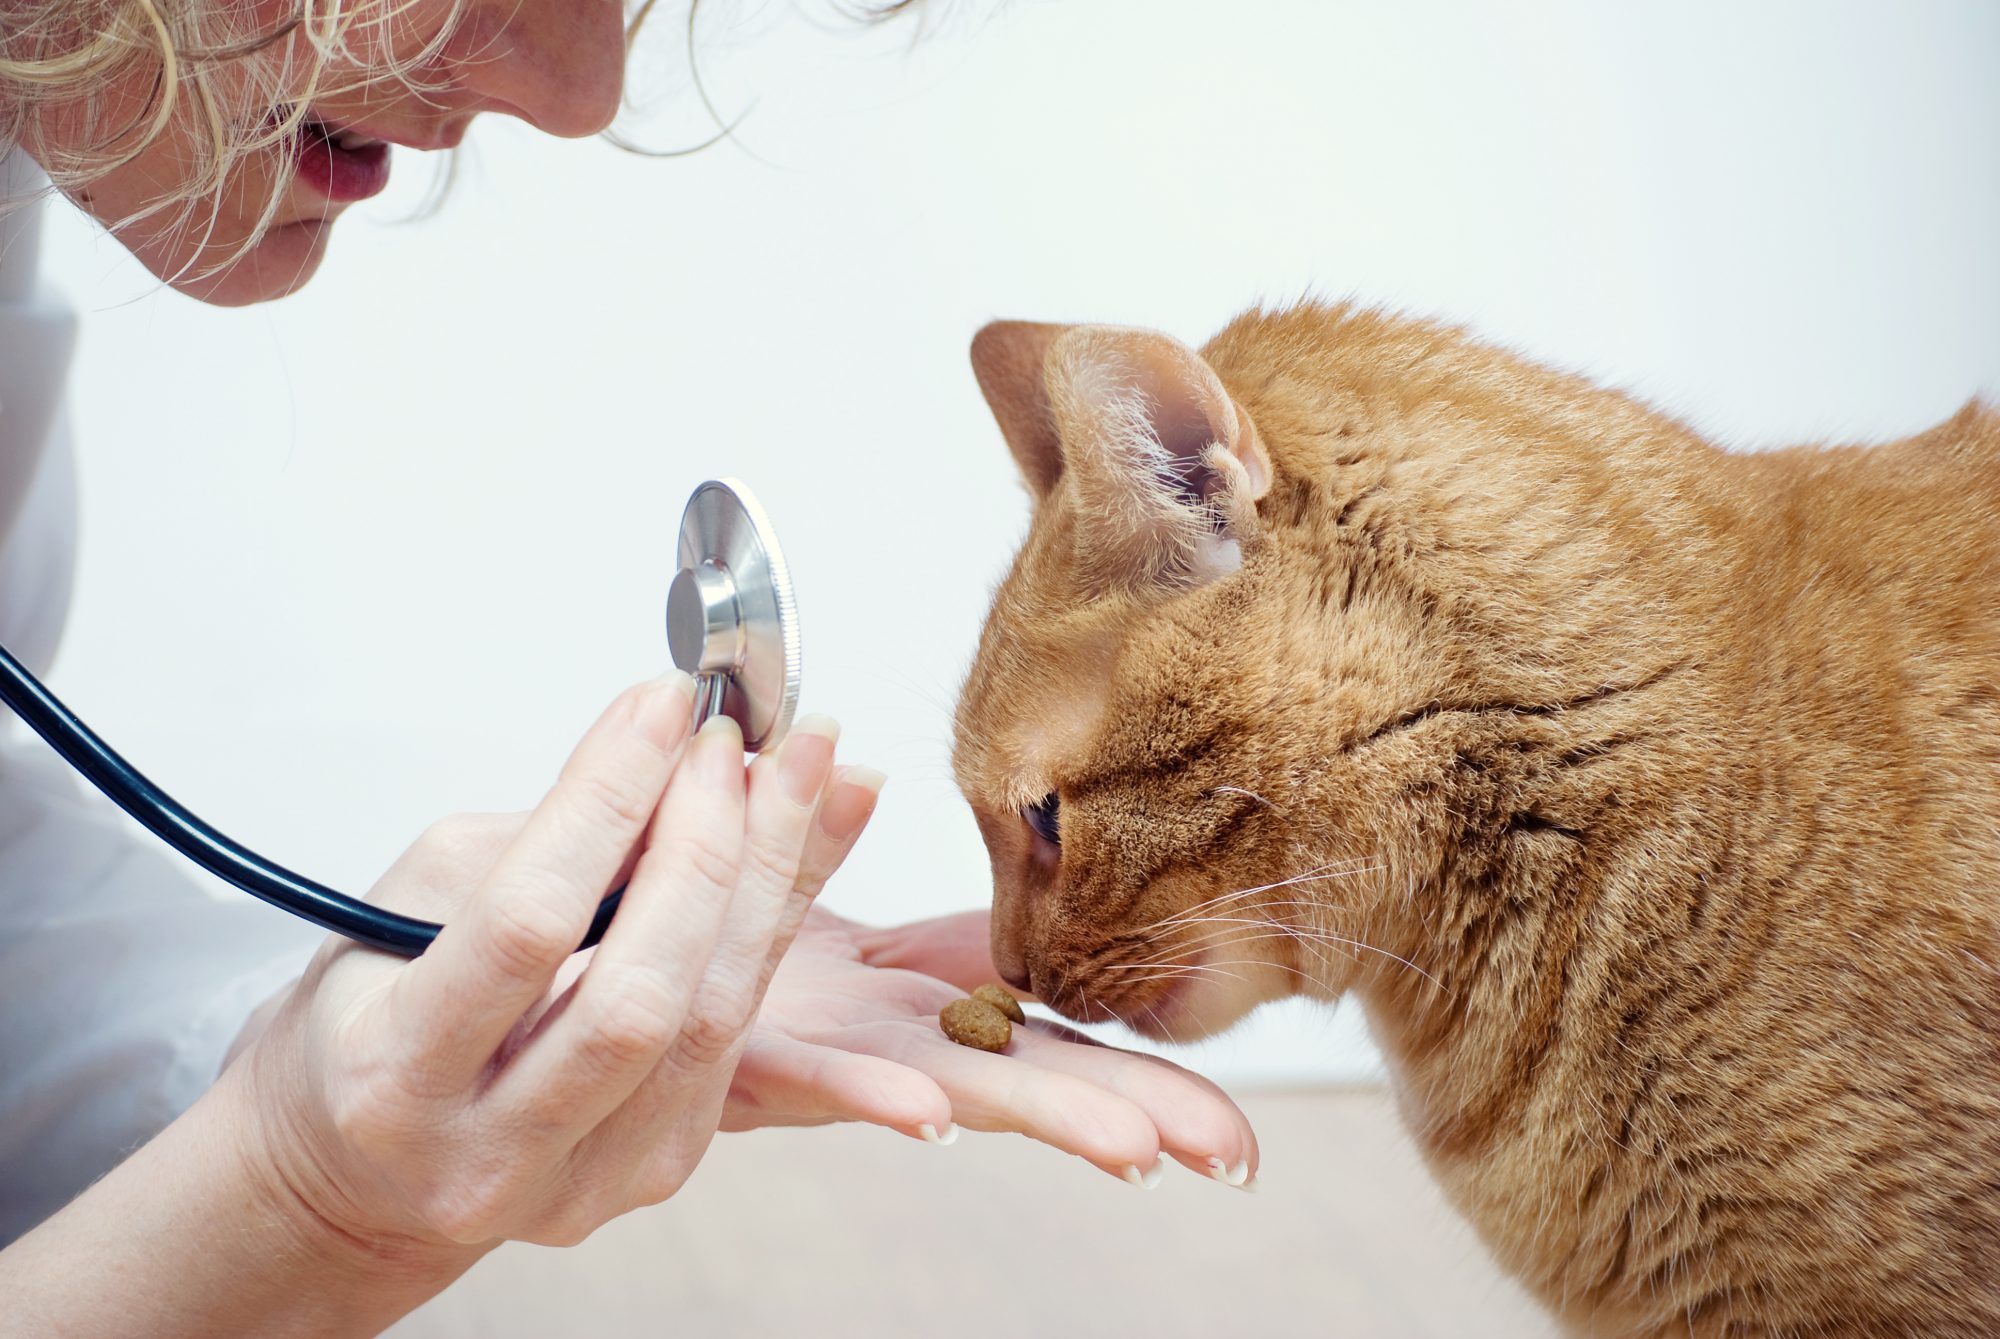 cat sniffing a treat in the hand of a veterinarian holding a stethoscope